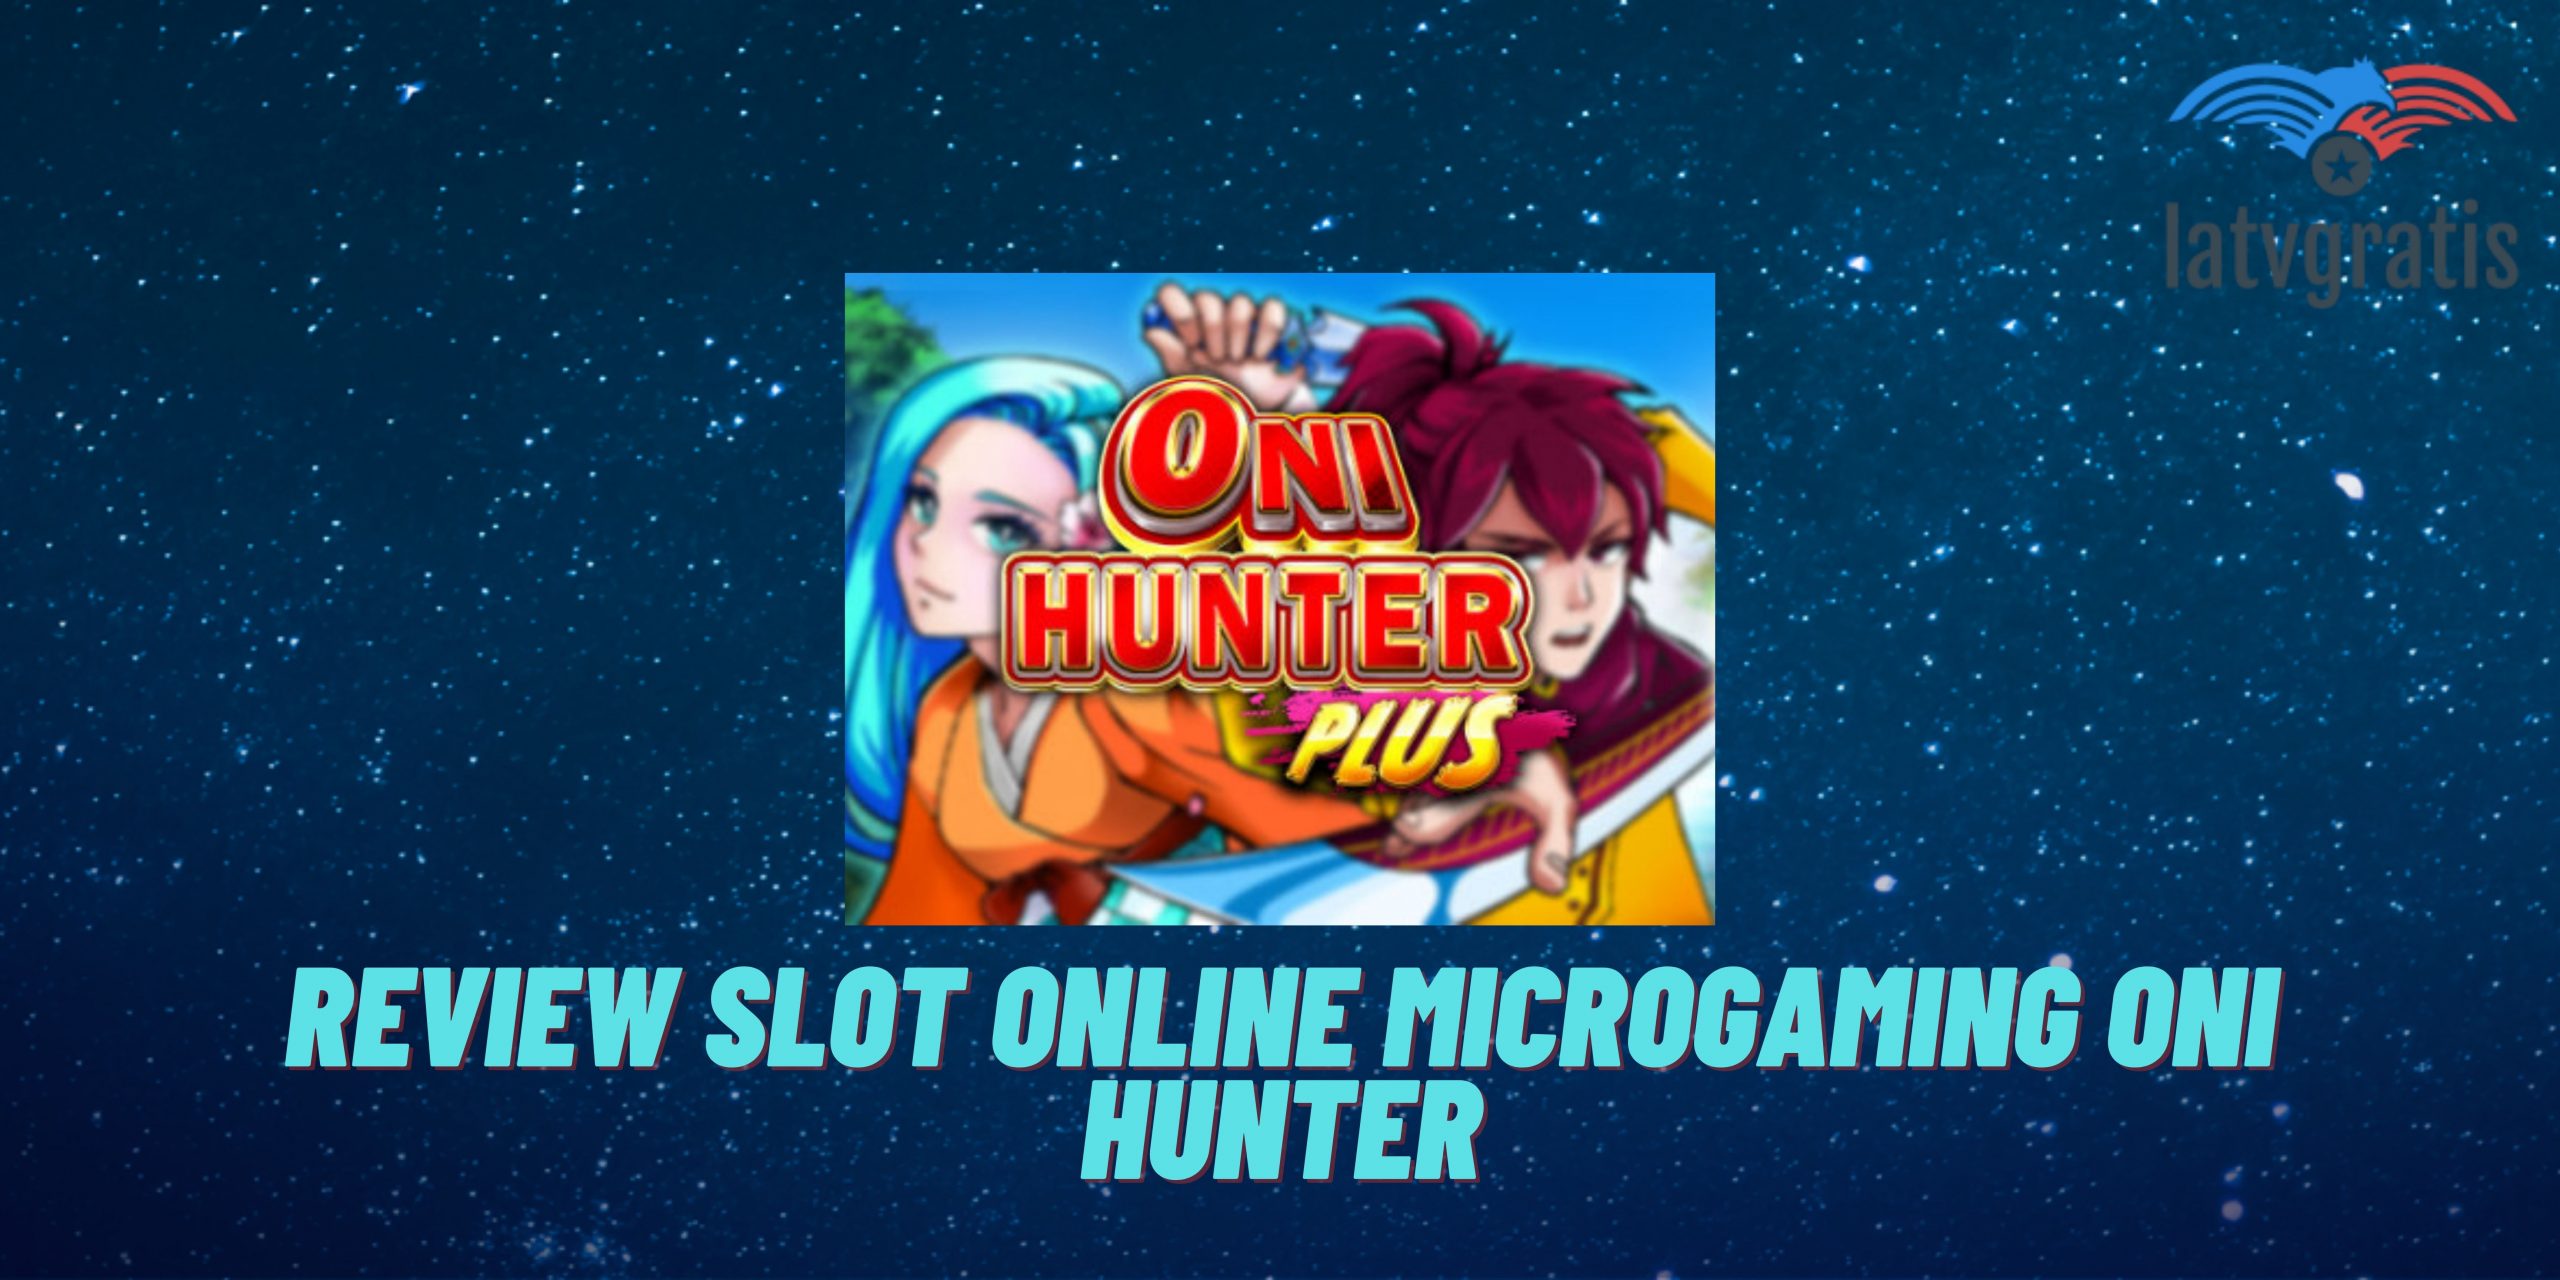 Review slot online microgaming oni hunter plus